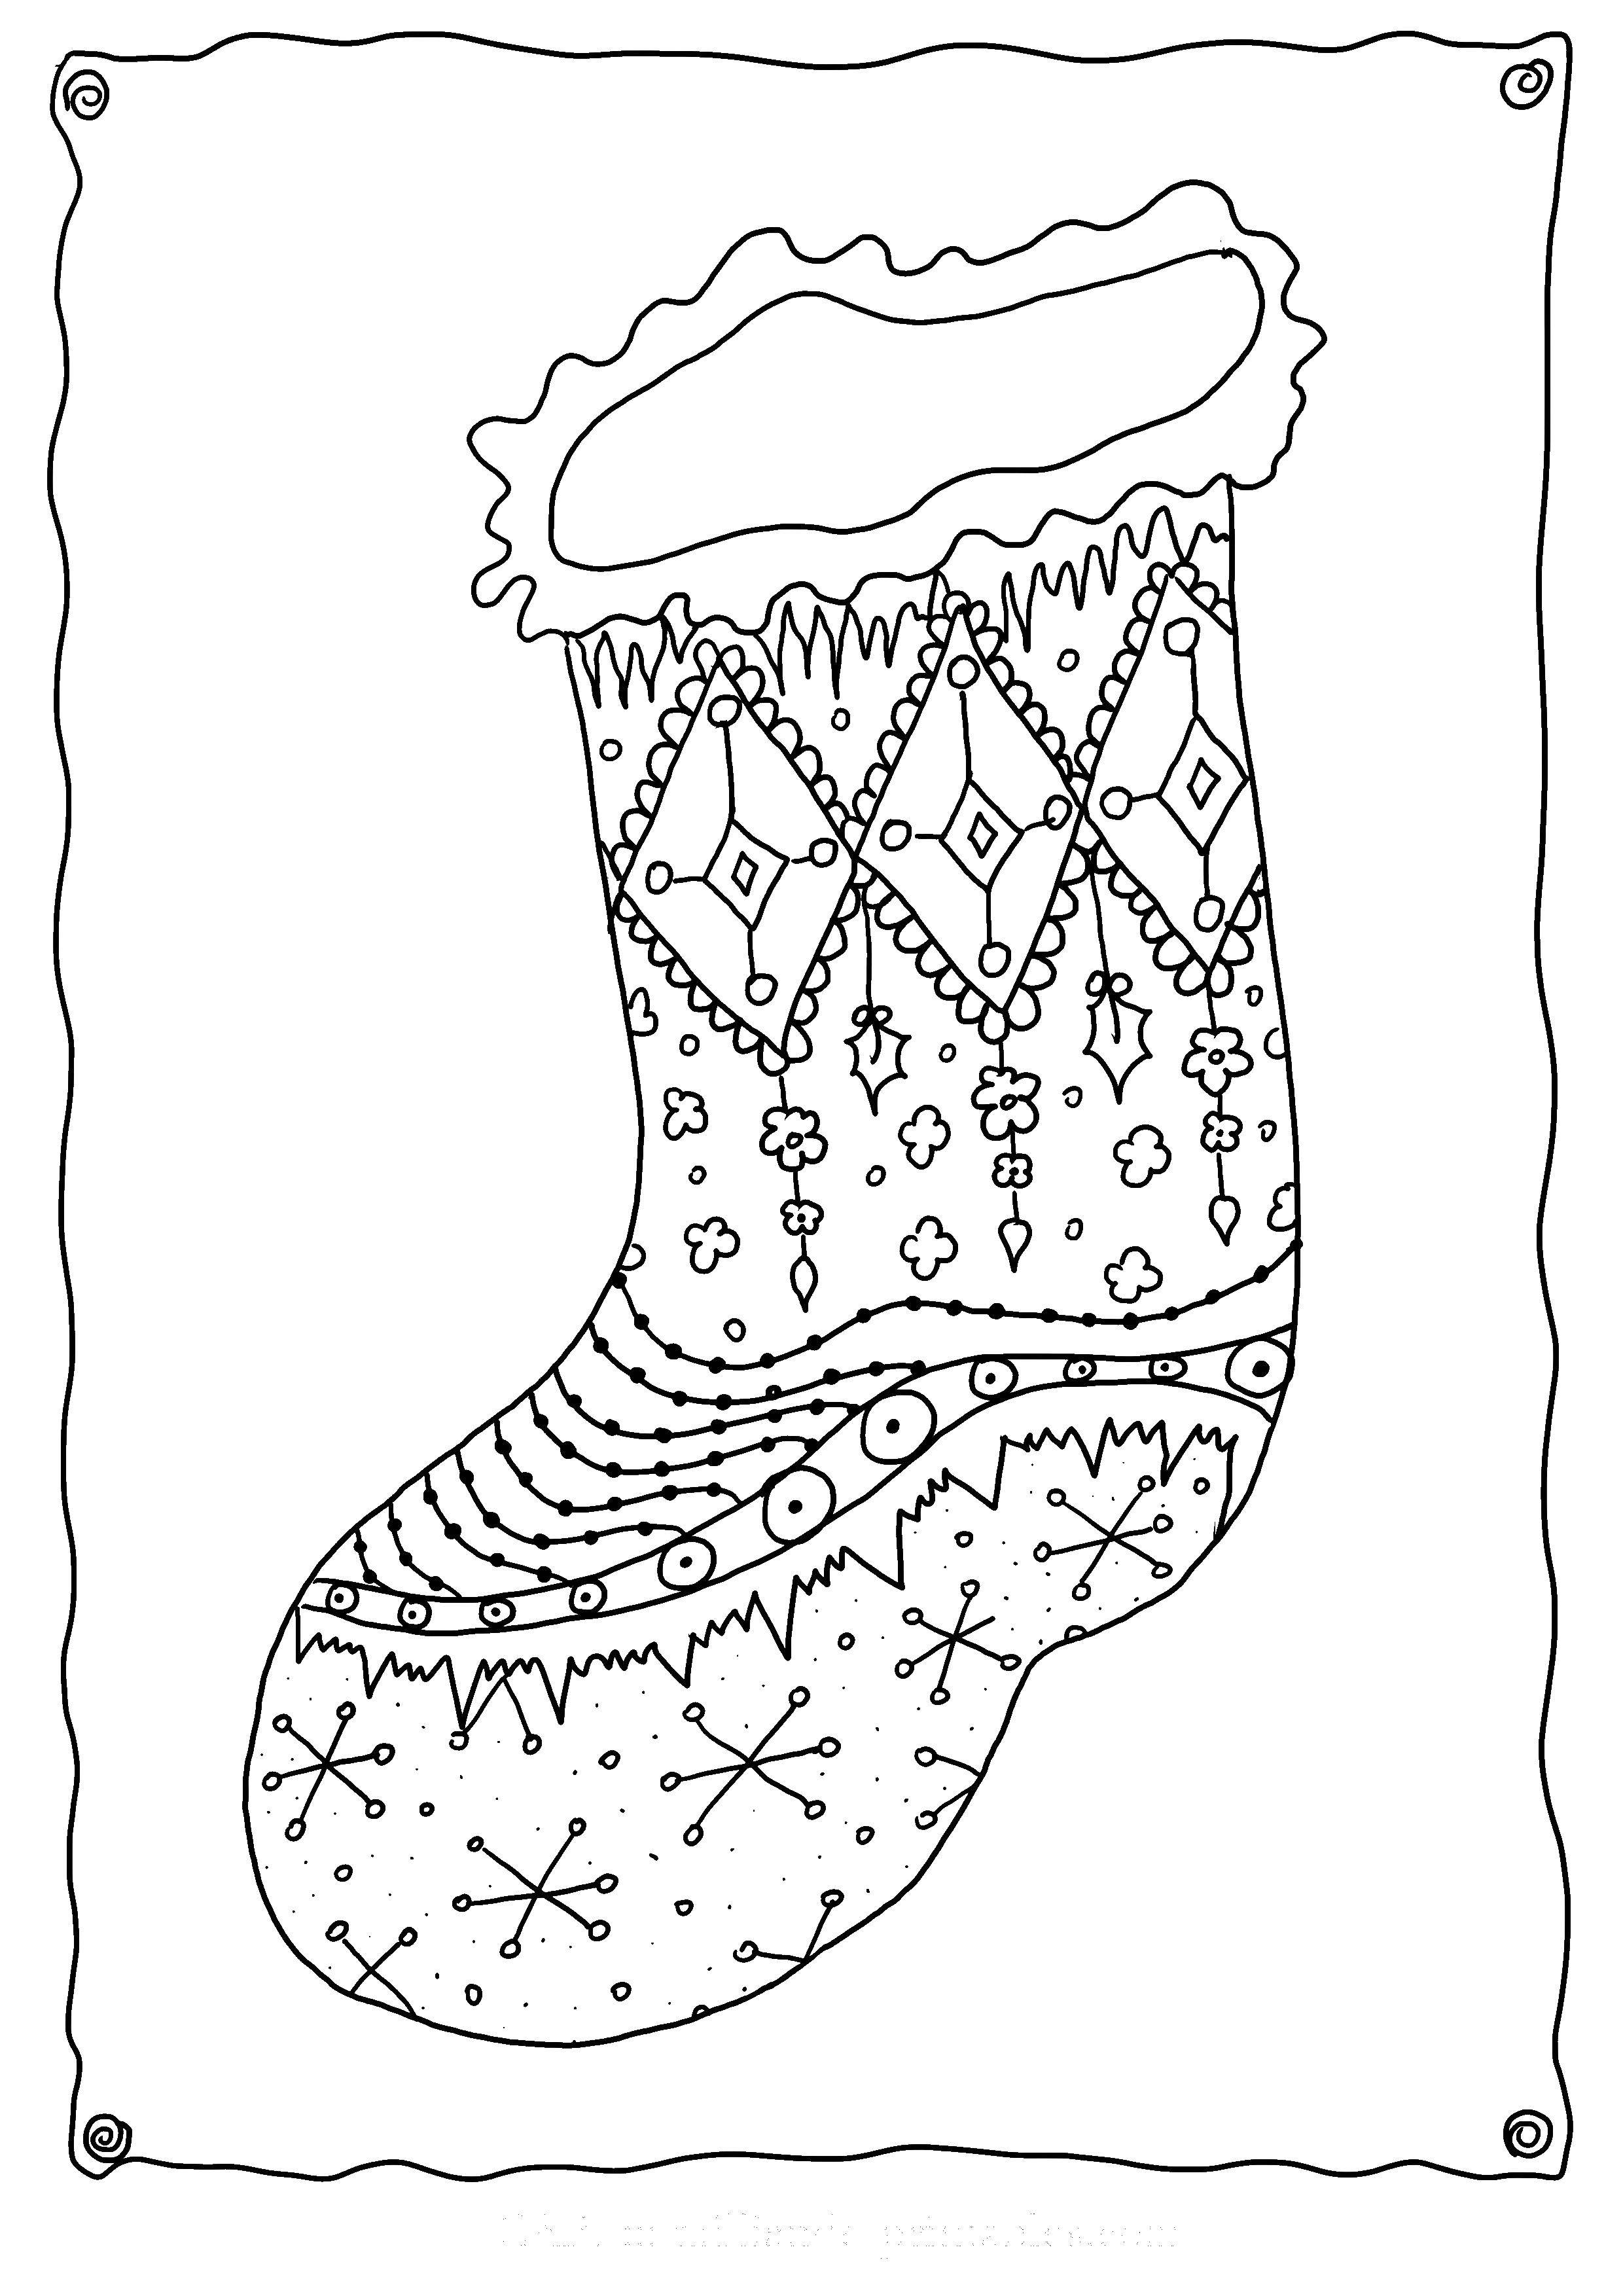 Coloring Winter sock. Category Clothing. Tags:  clothing, socks.